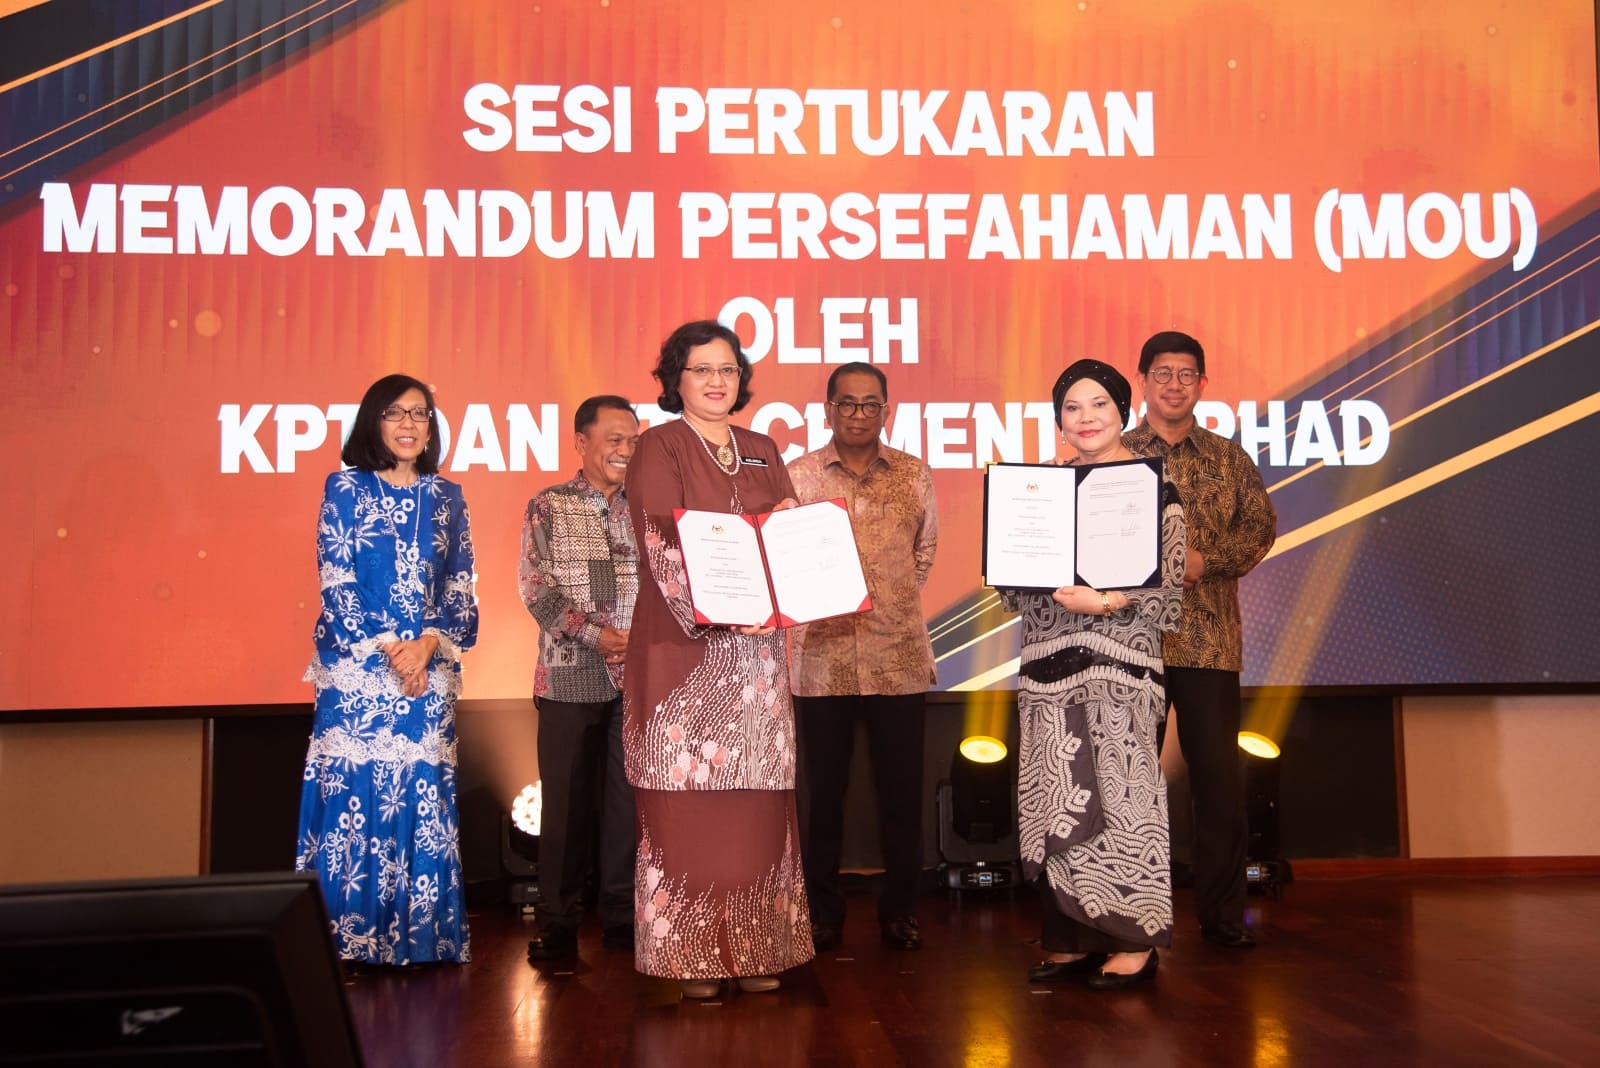 Malaysia’s First University-Industry Research Consortium